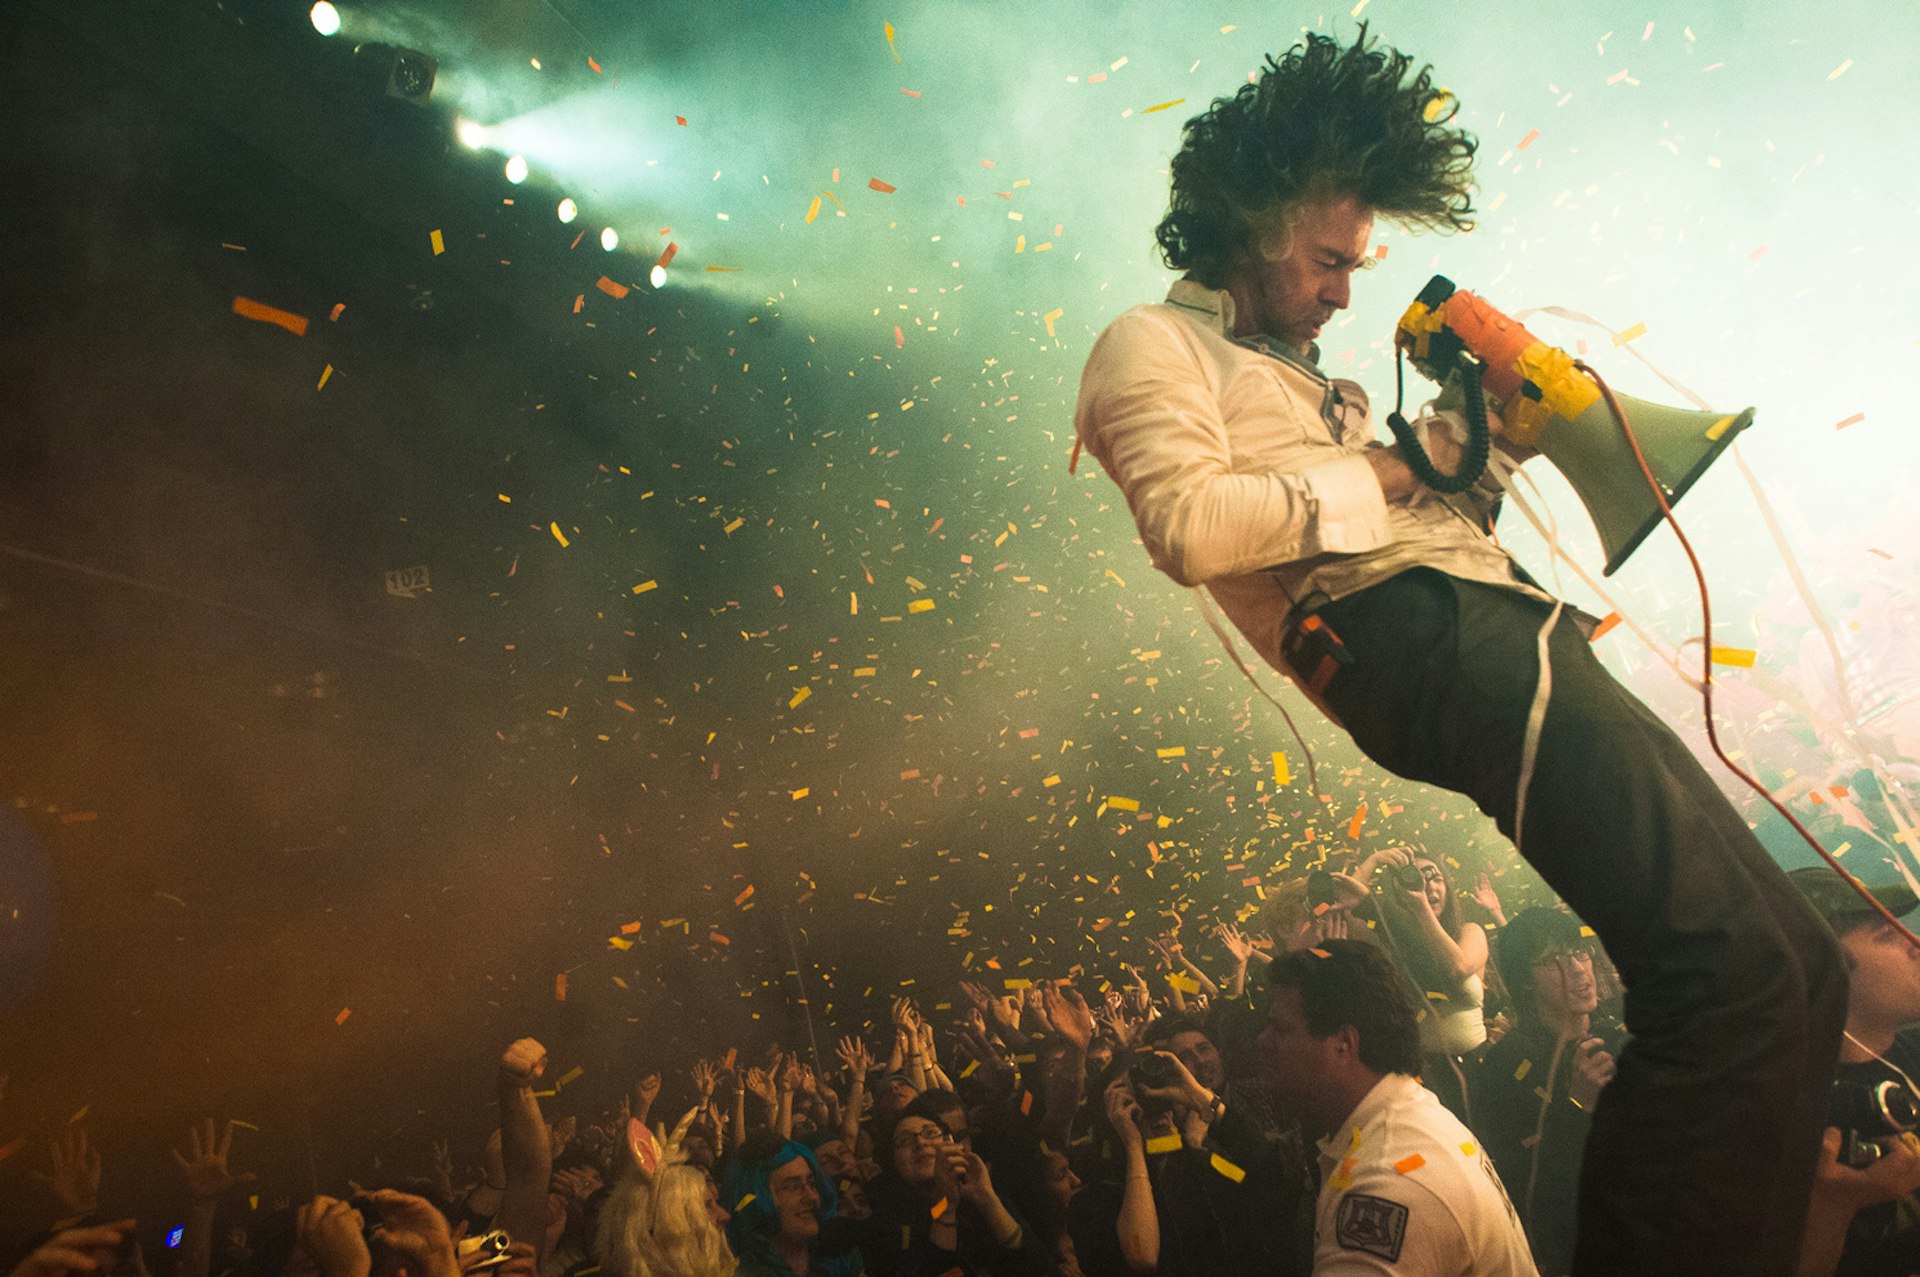 The Flaming Lips:  A weird-ass story of self-discovery